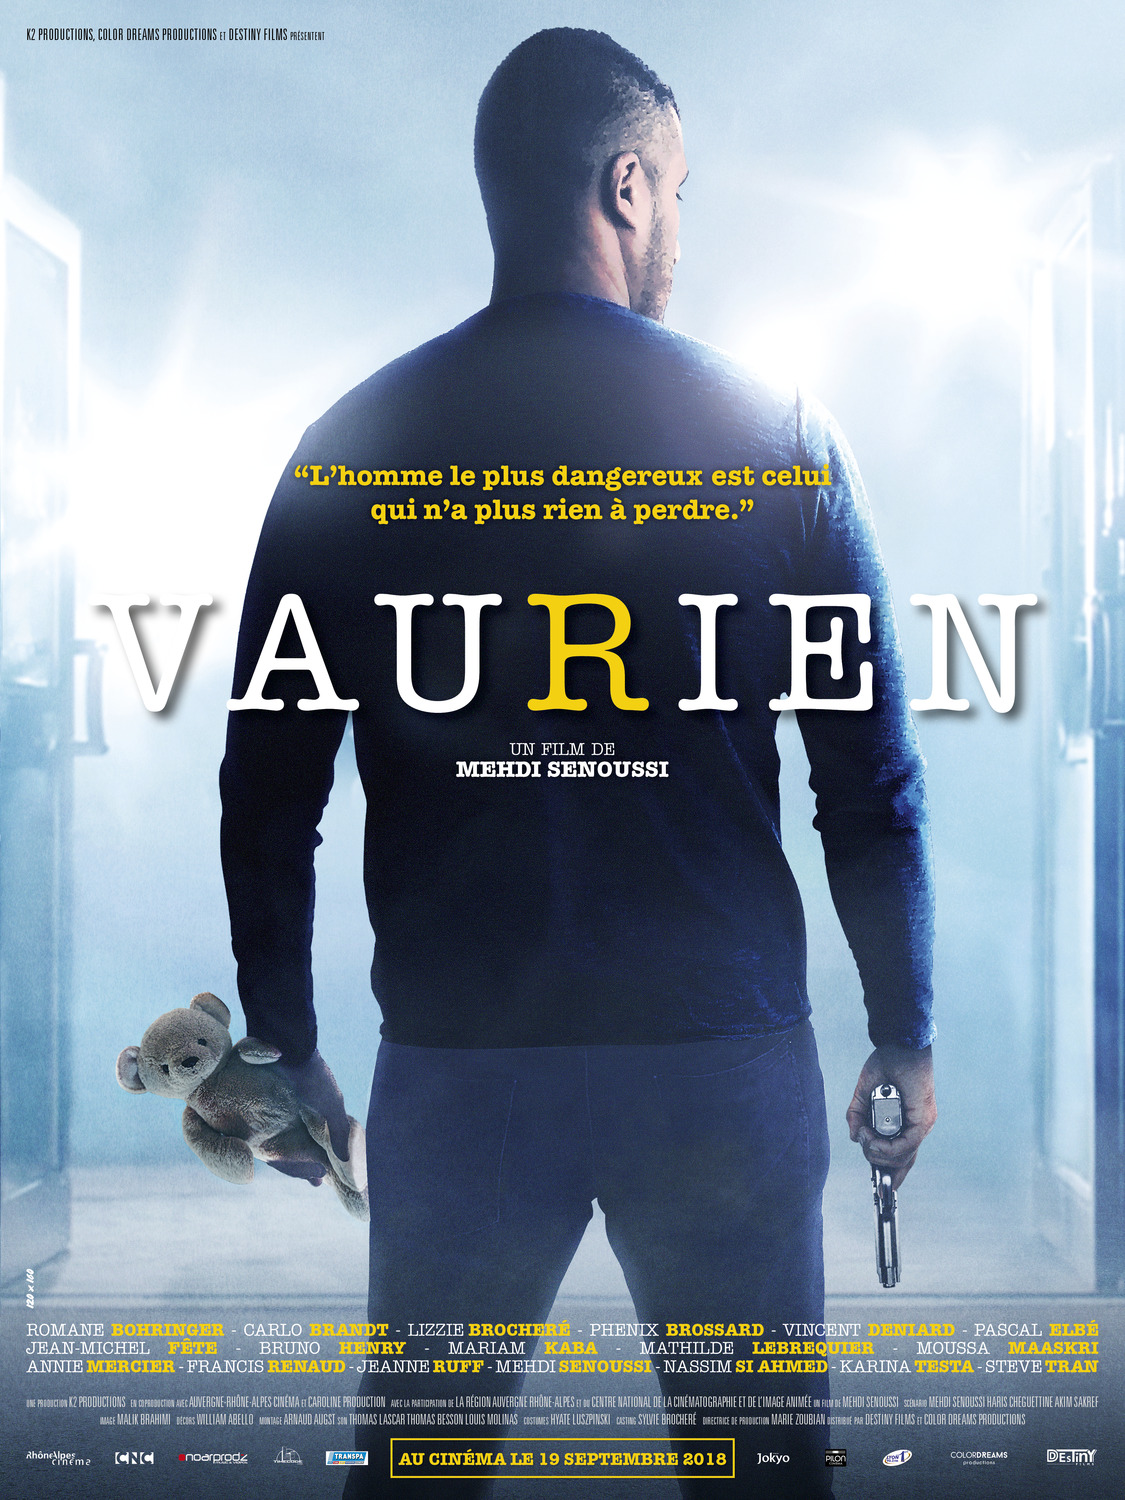 Extra Large Movie Poster Image for Vaurien 